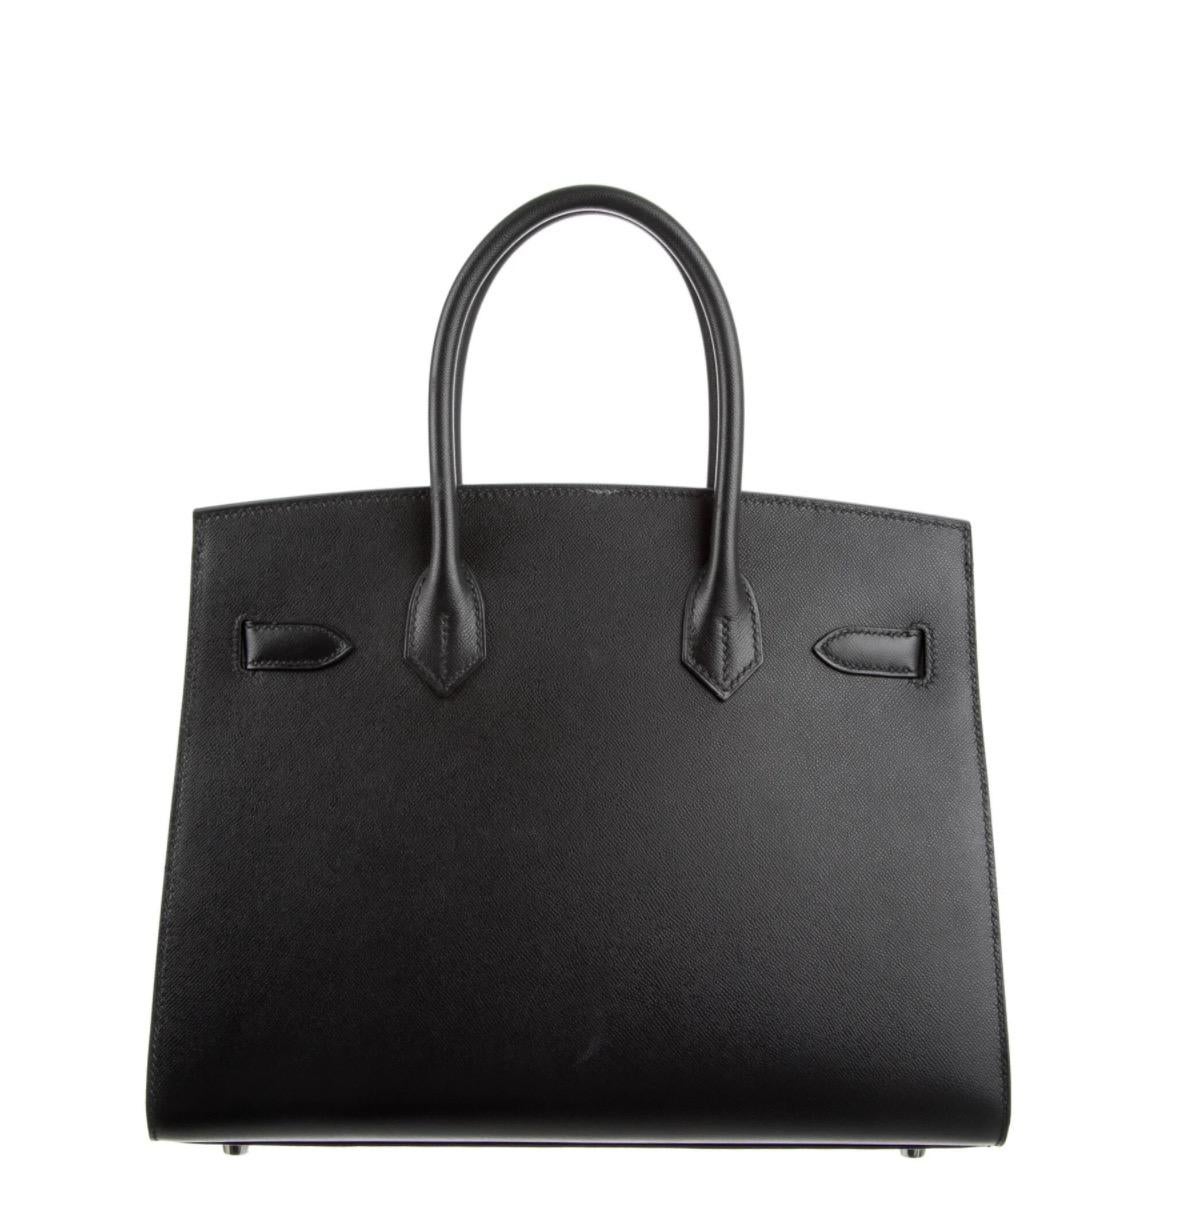 Leather
Palladium plated hardware
Leather lining
Turn-lock and flap closures
Handle drop 3.5